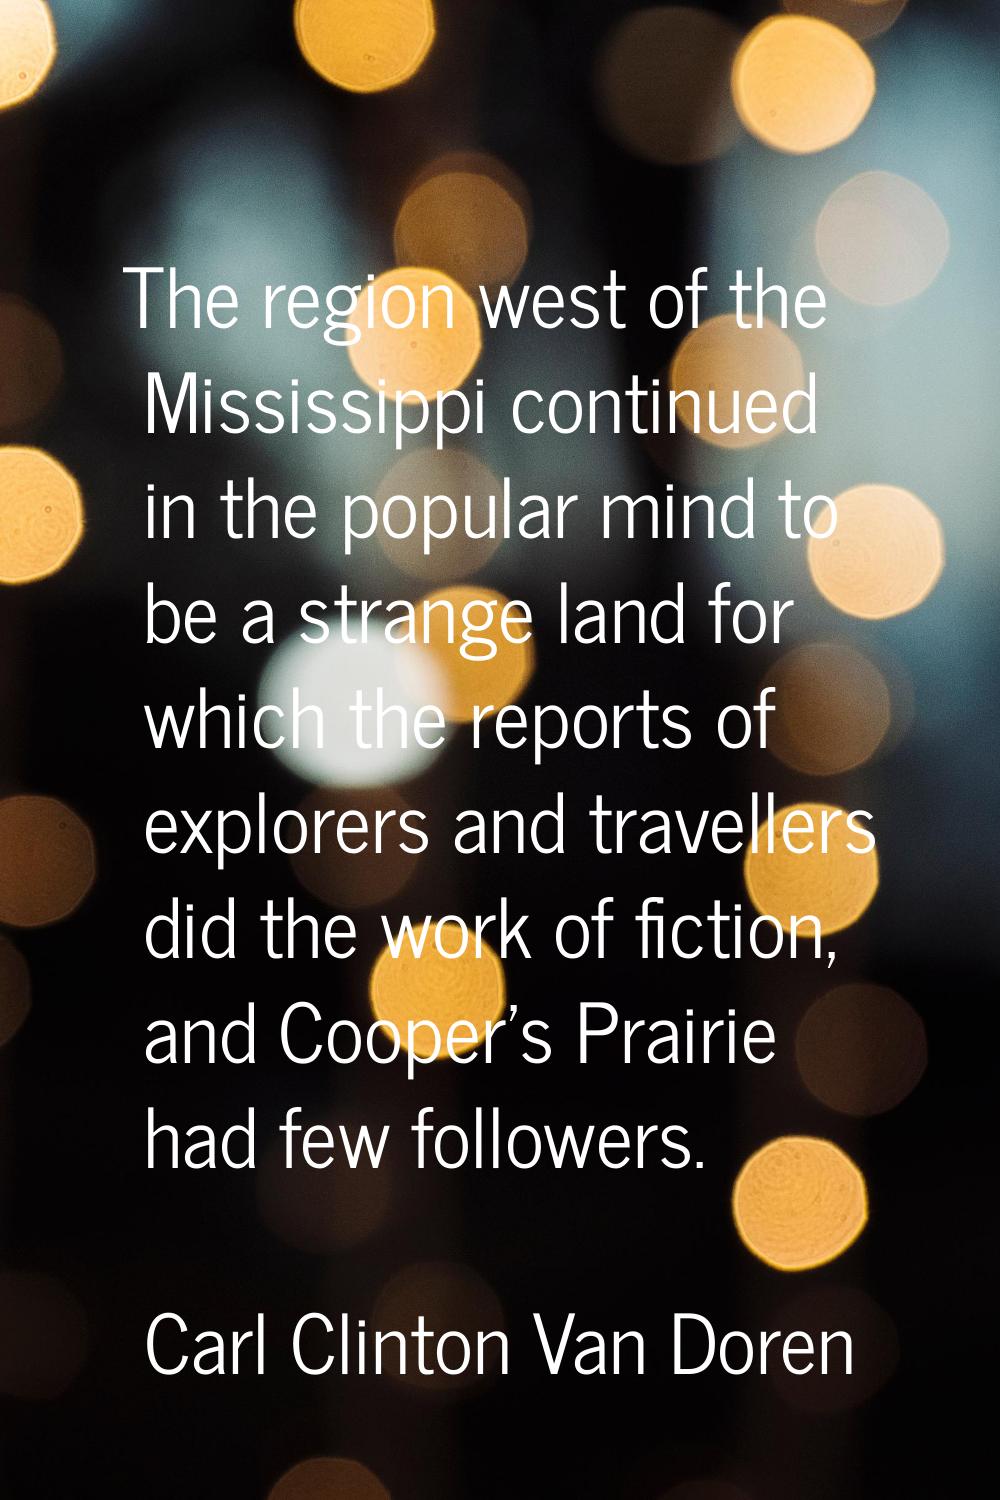 The region west of the Mississippi continued in the popular mind to be a strange land for which the